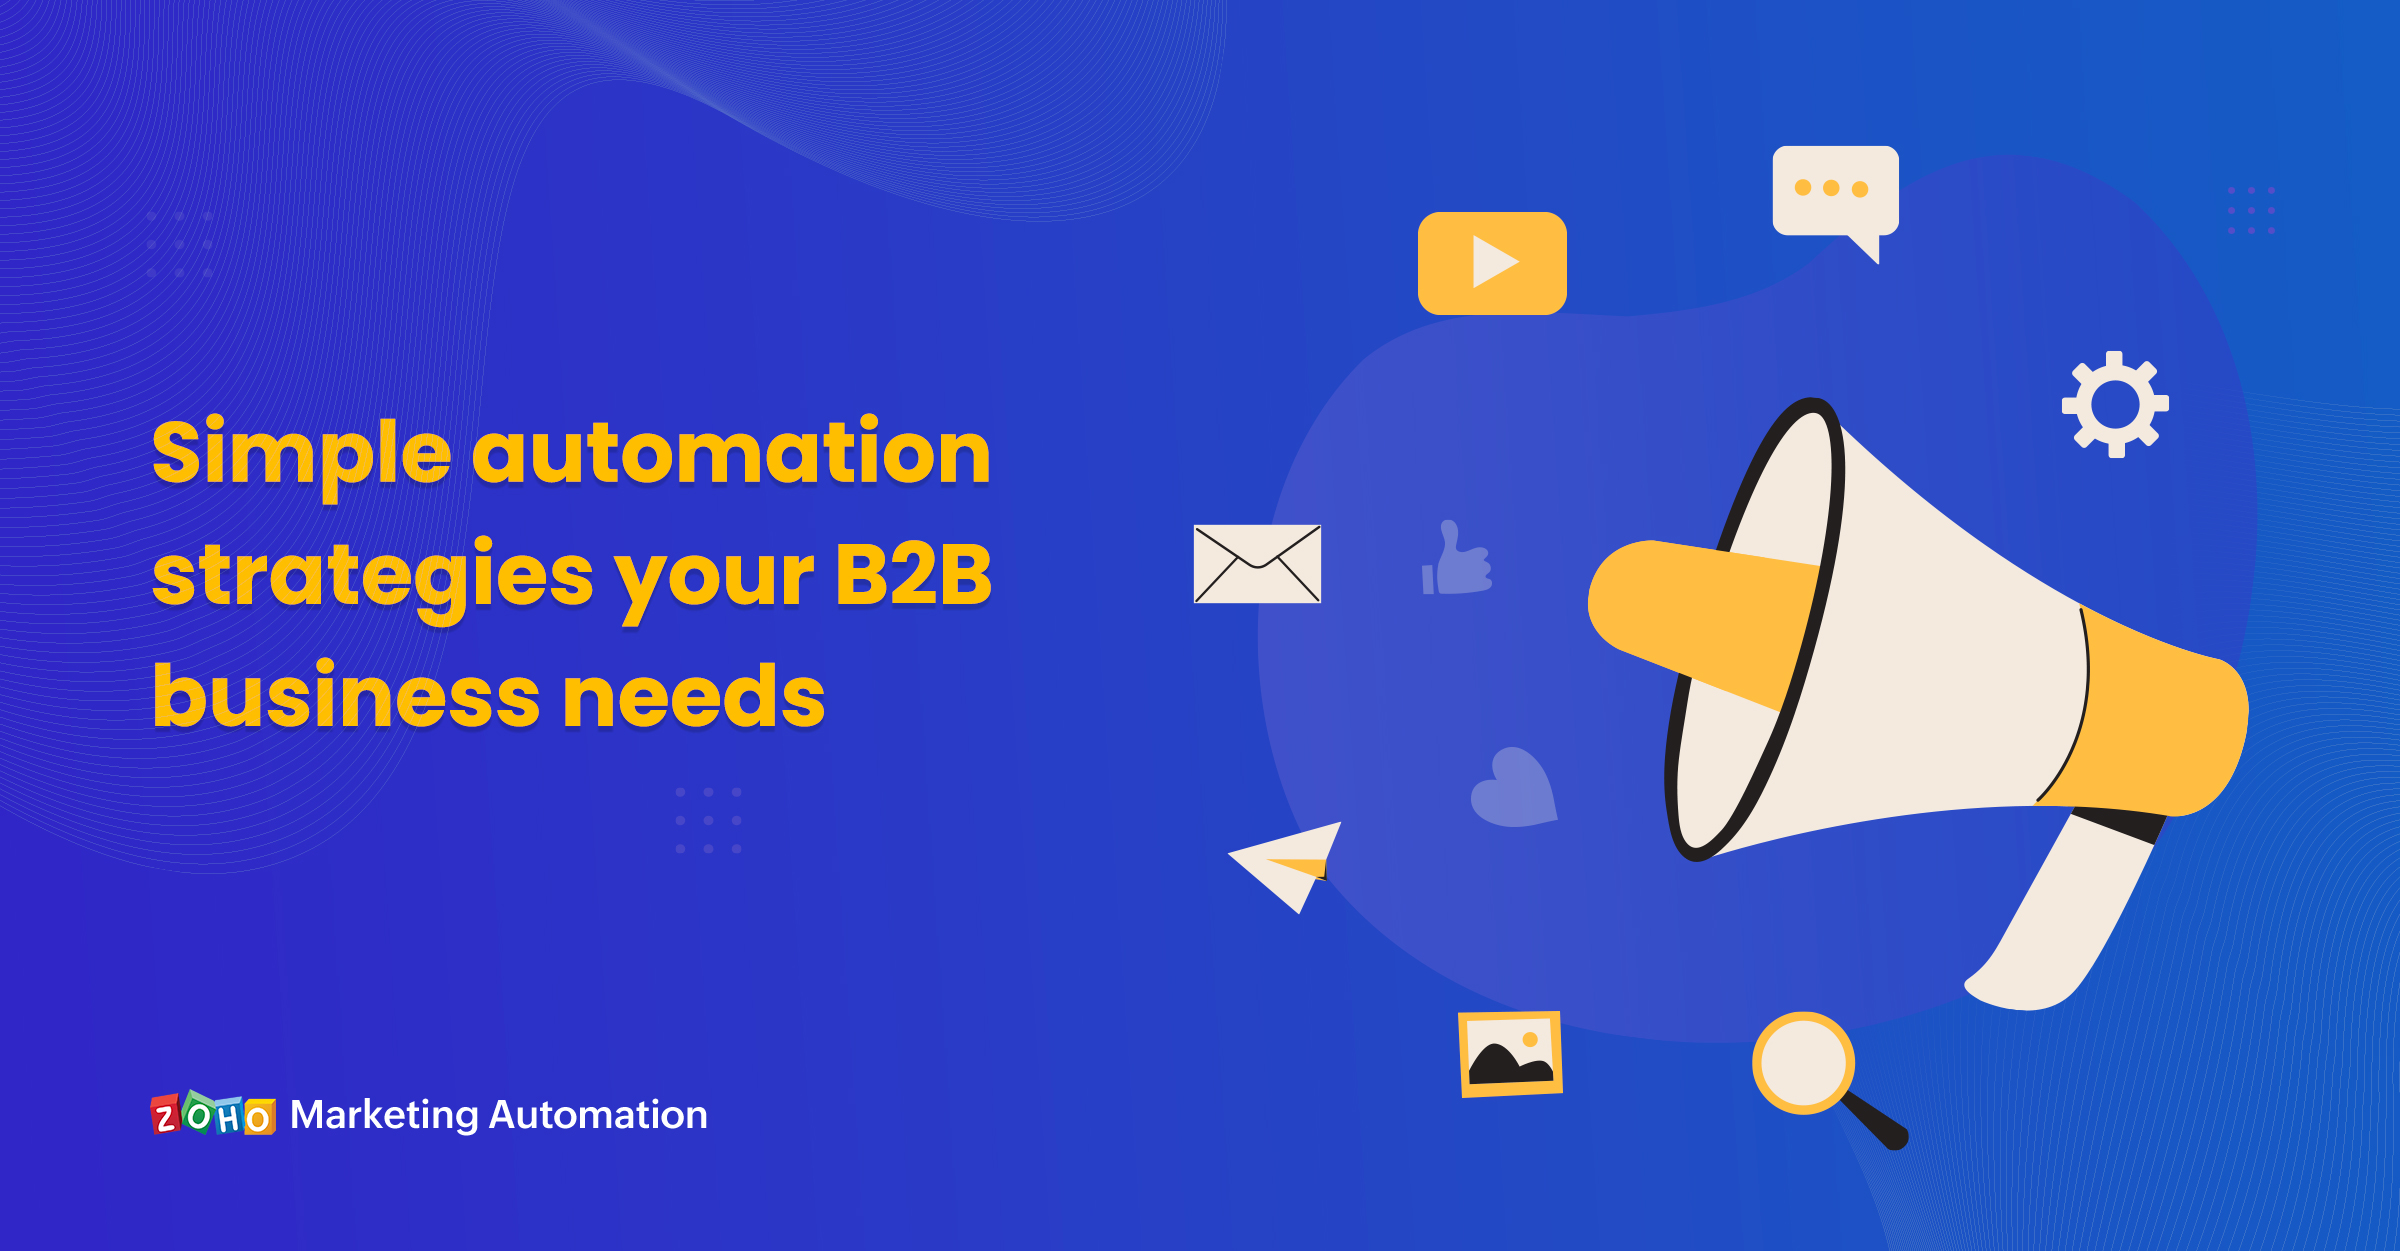 Simple automation strategies your B2B business needs